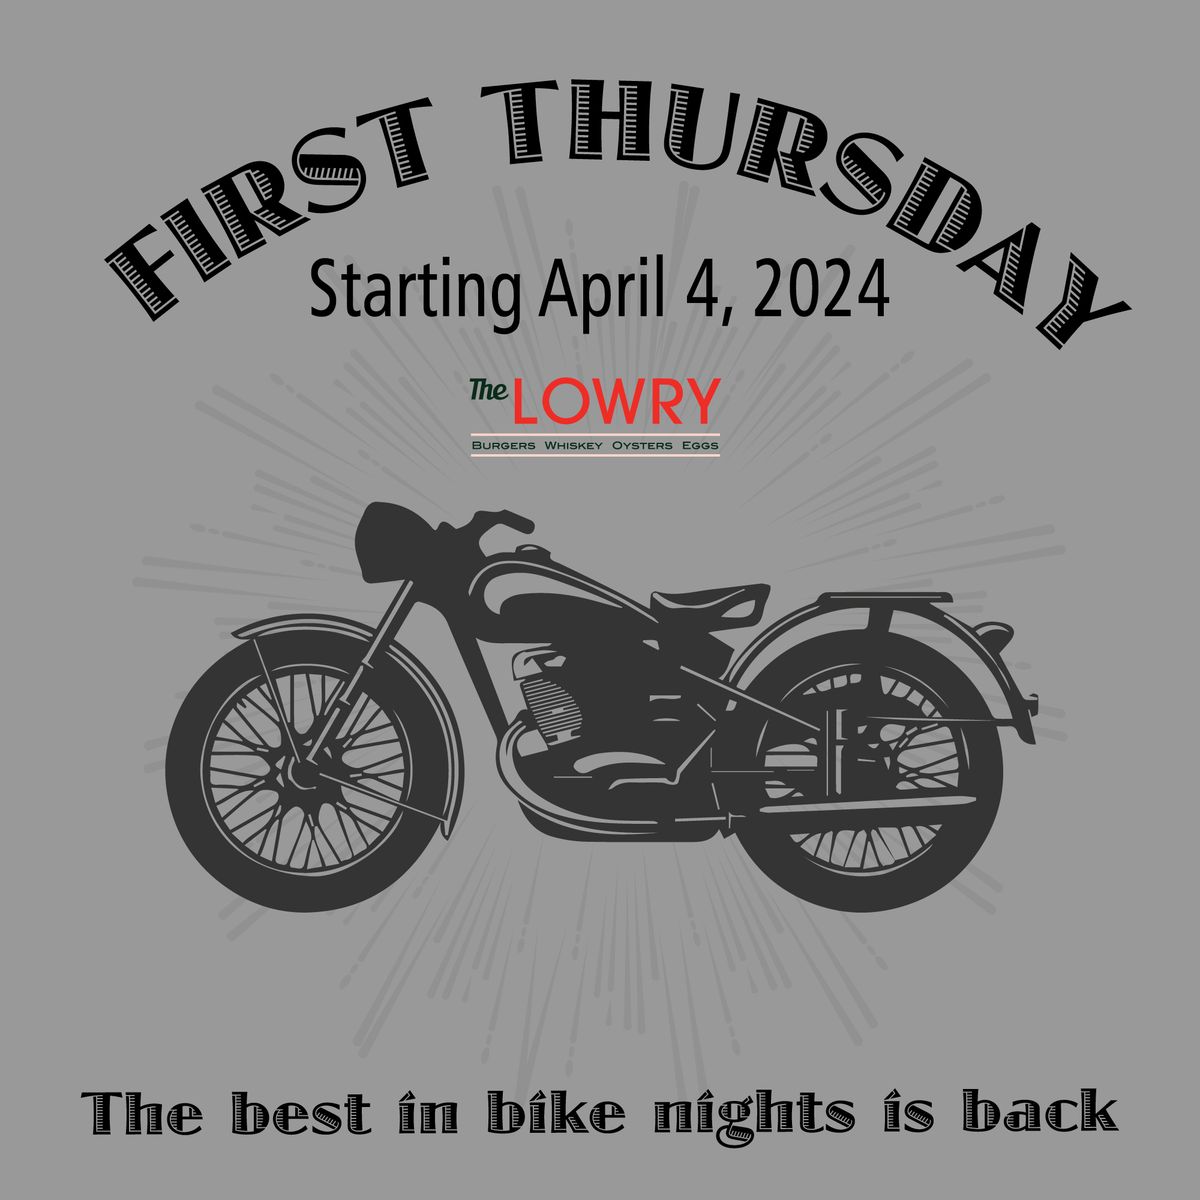 First Thursday Motorcycle Event